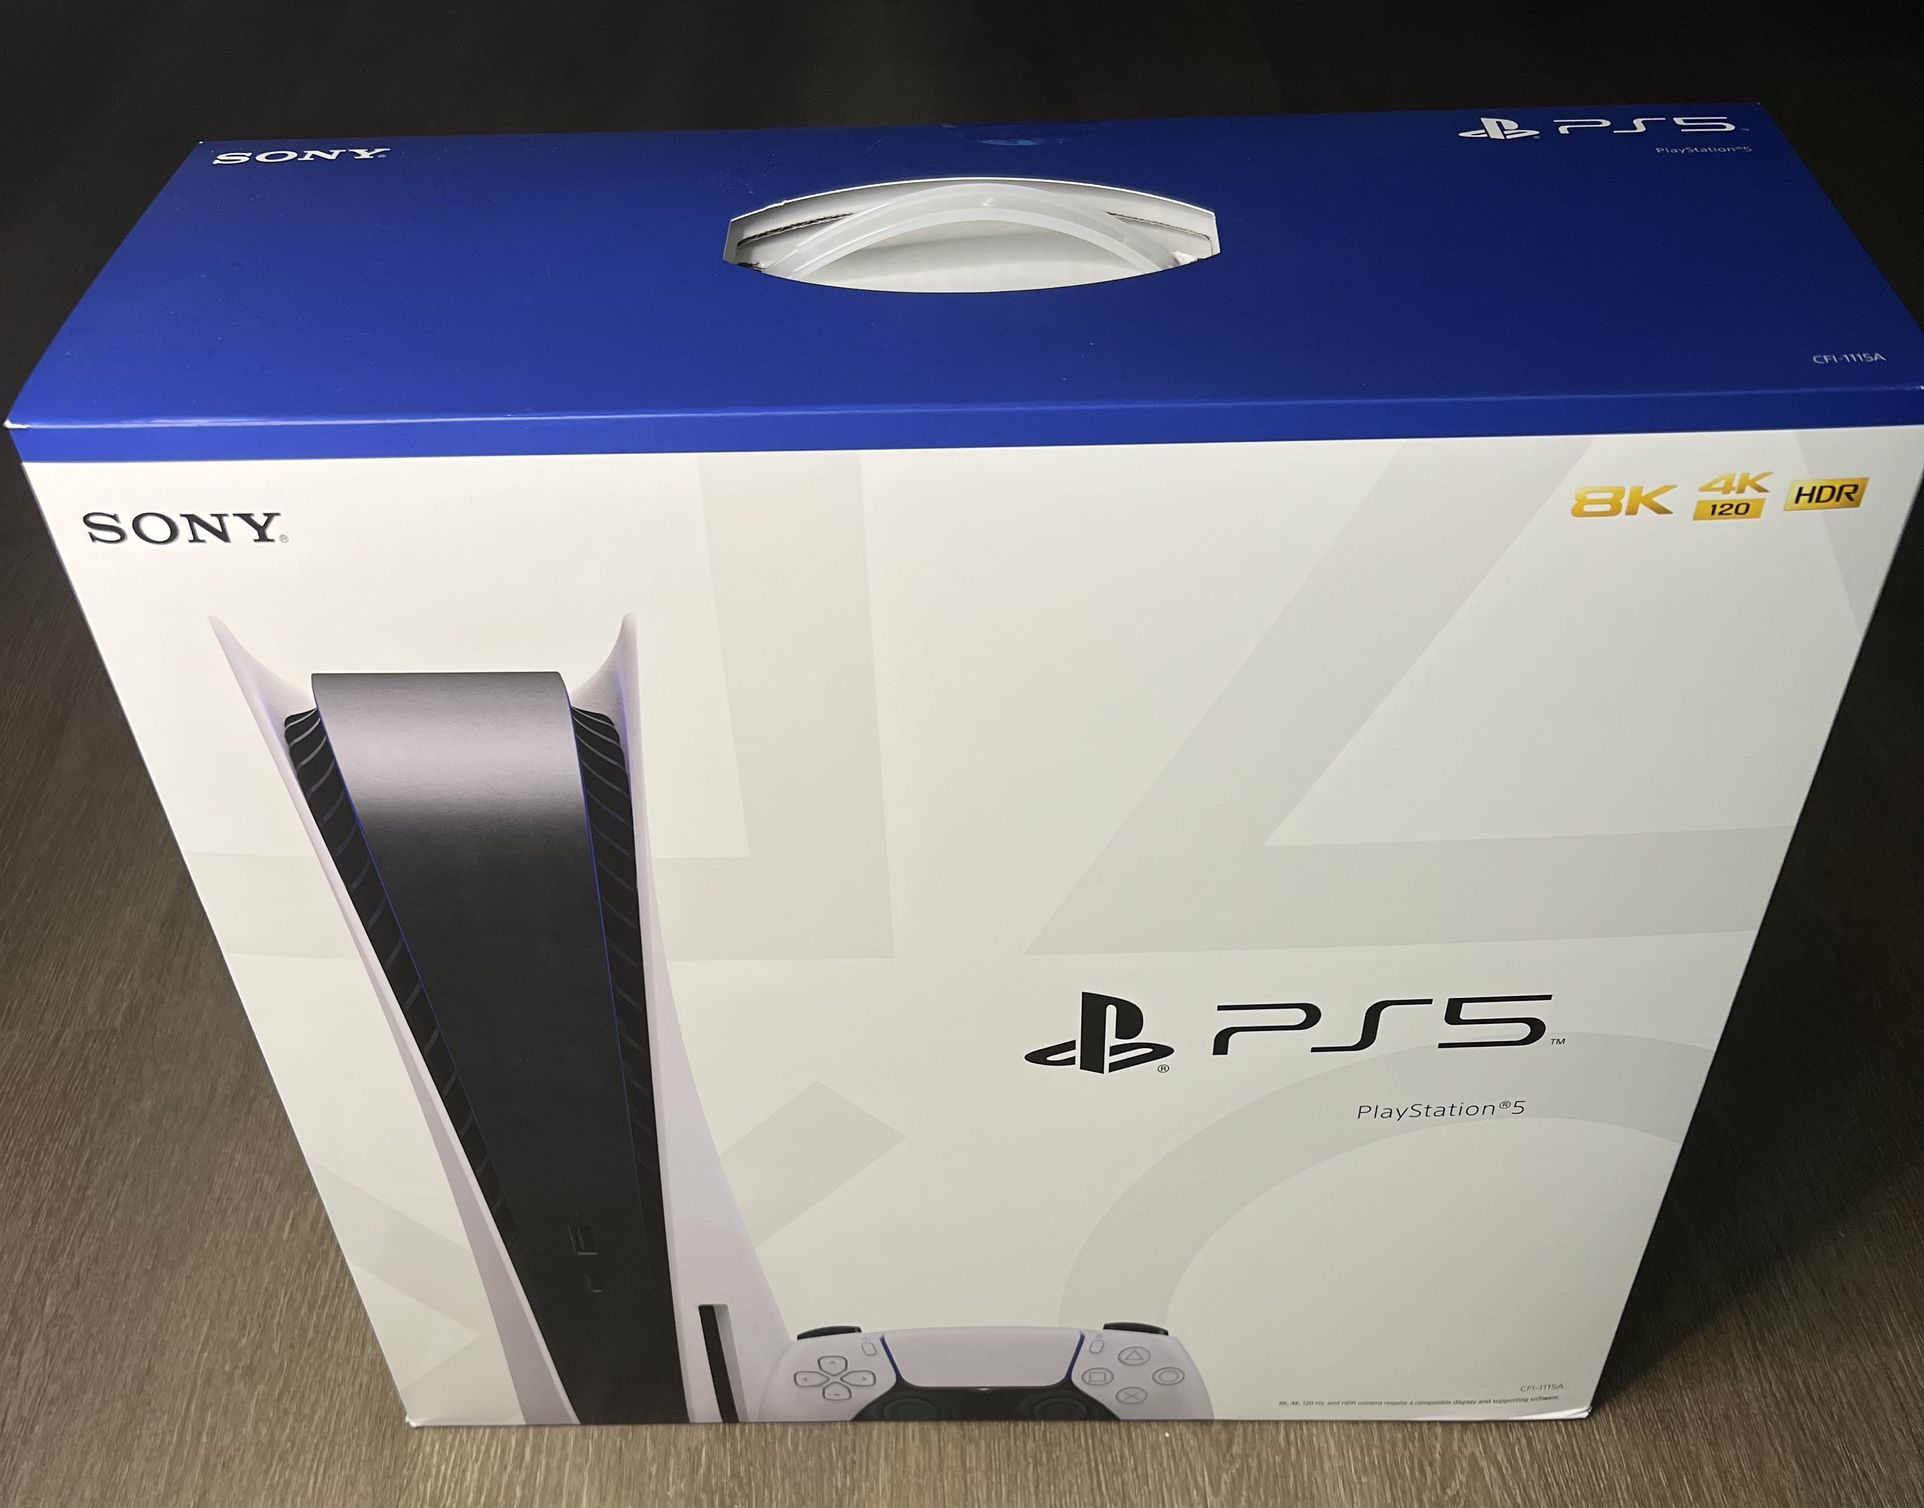 PlayStation 5 (Disc) New In box $425